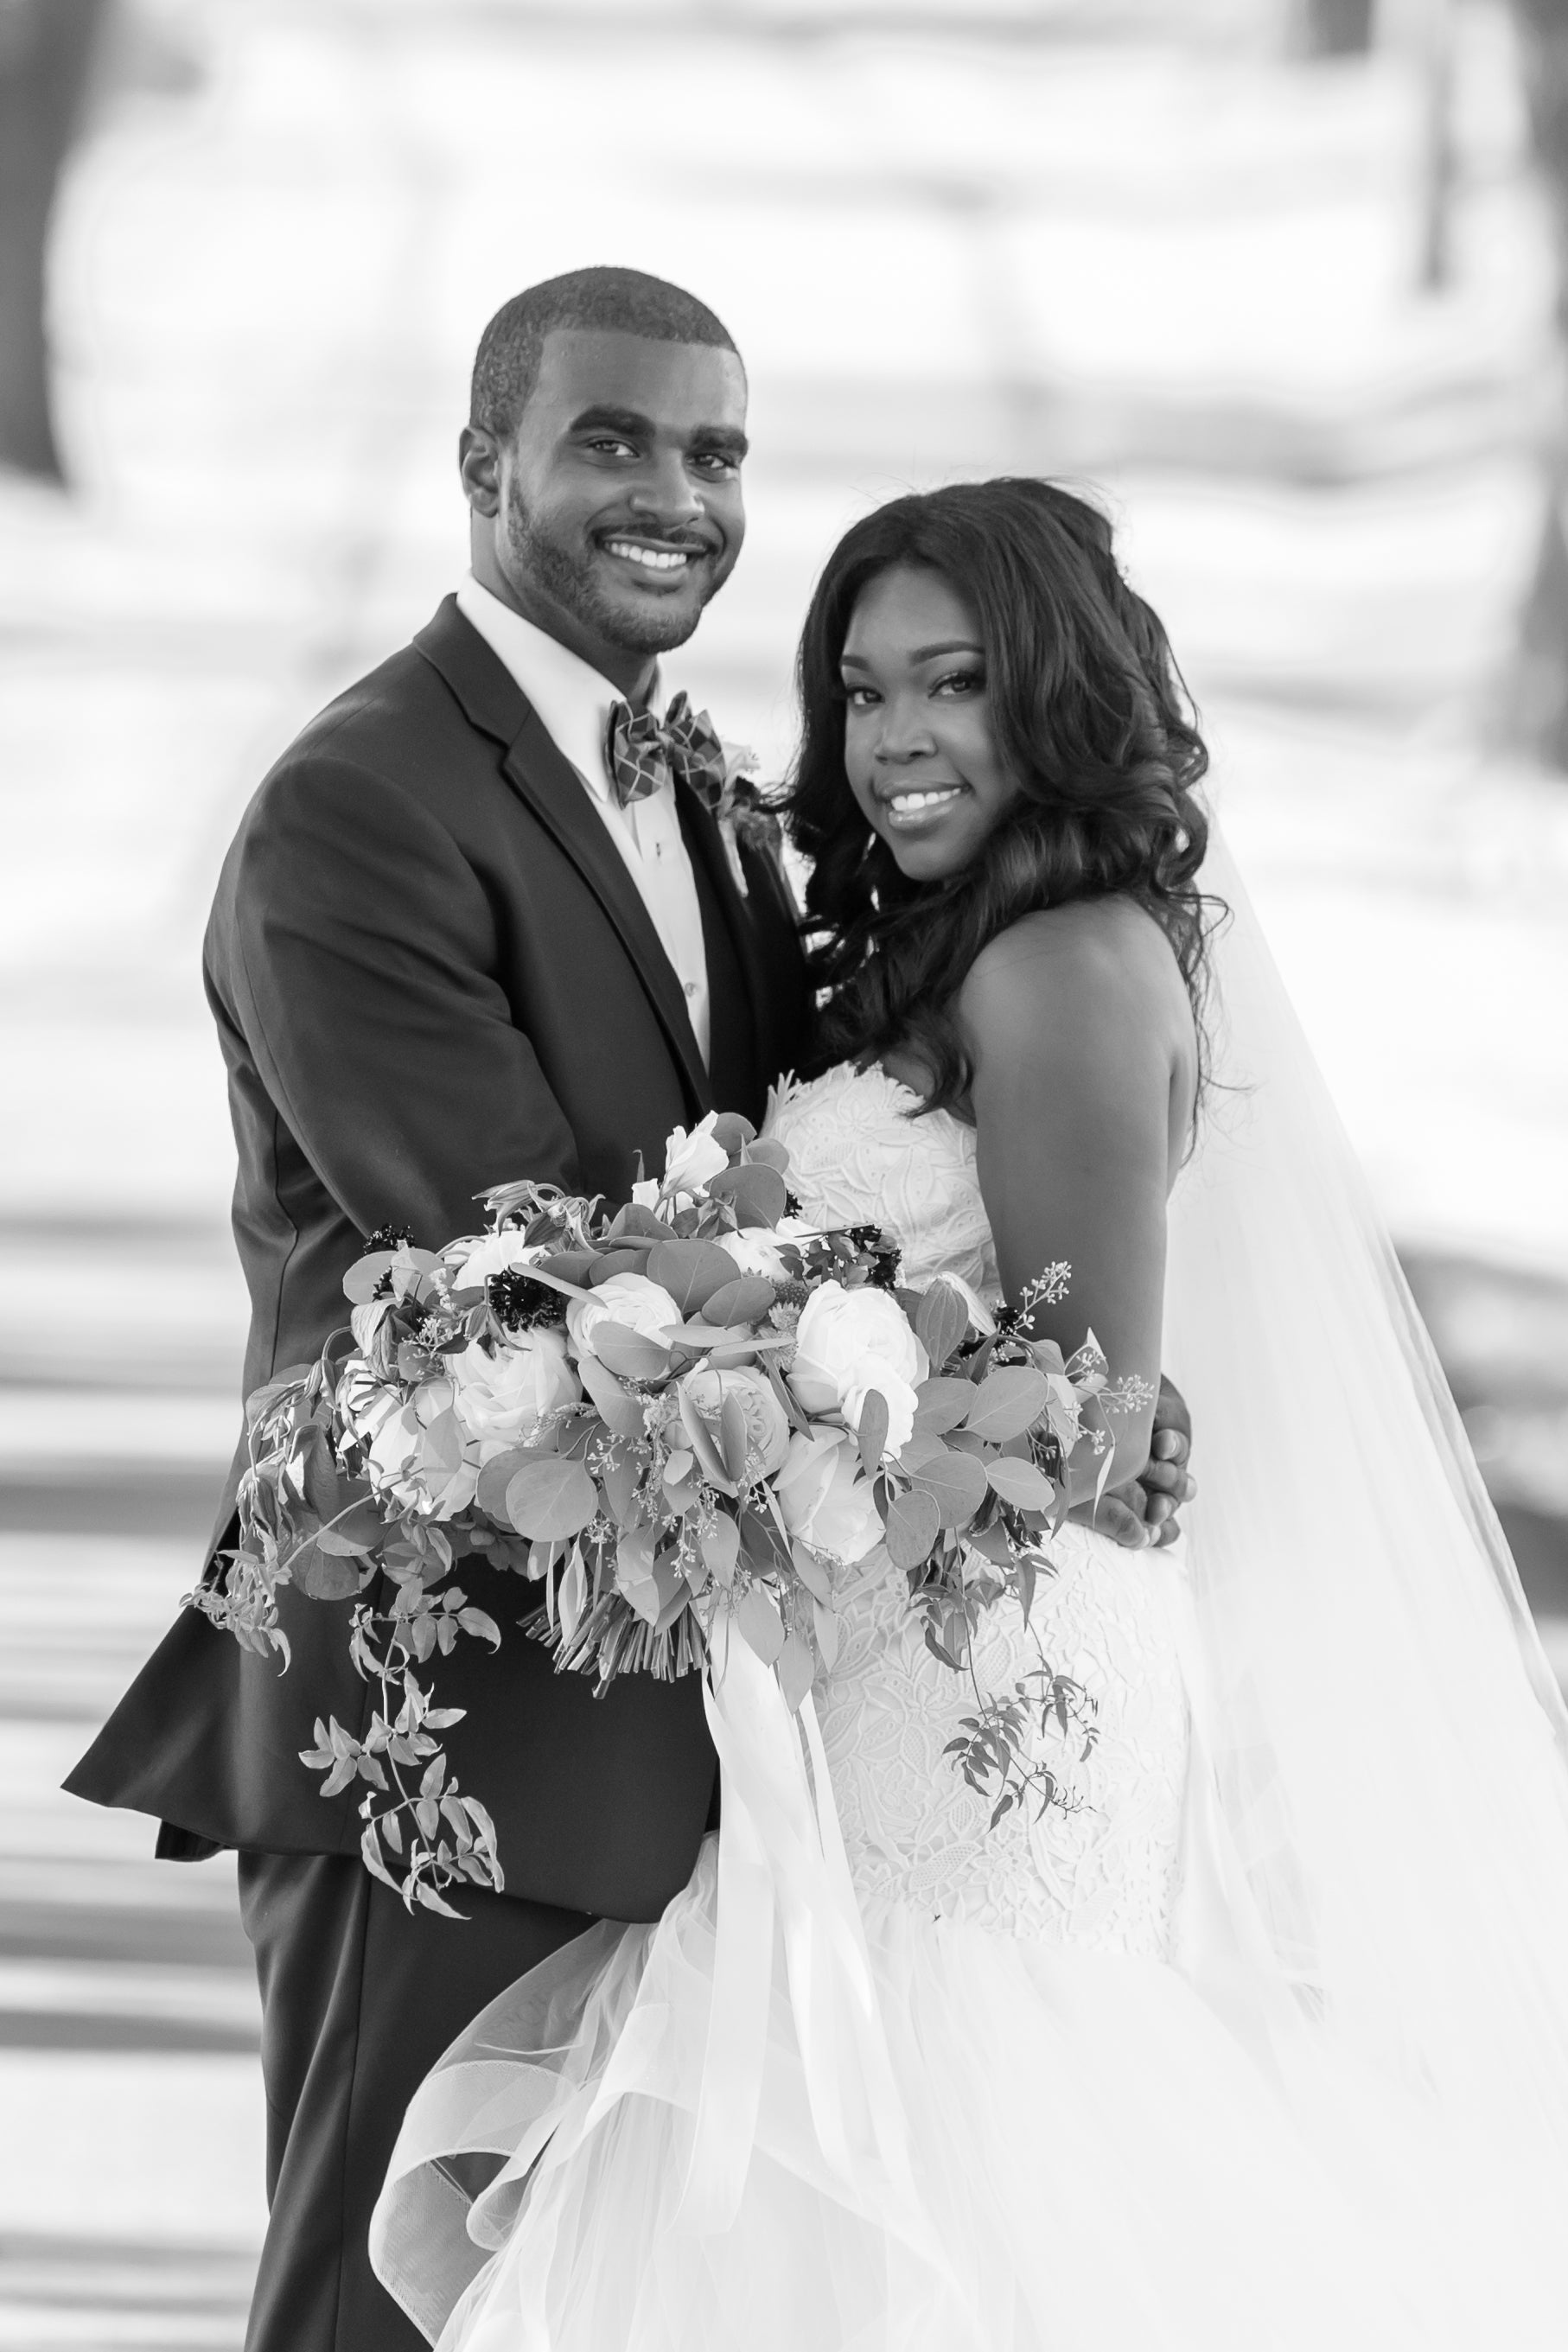 Bridal Bliss: Brian And Elesia's Tender Wedding Photos Will Make You Smile
